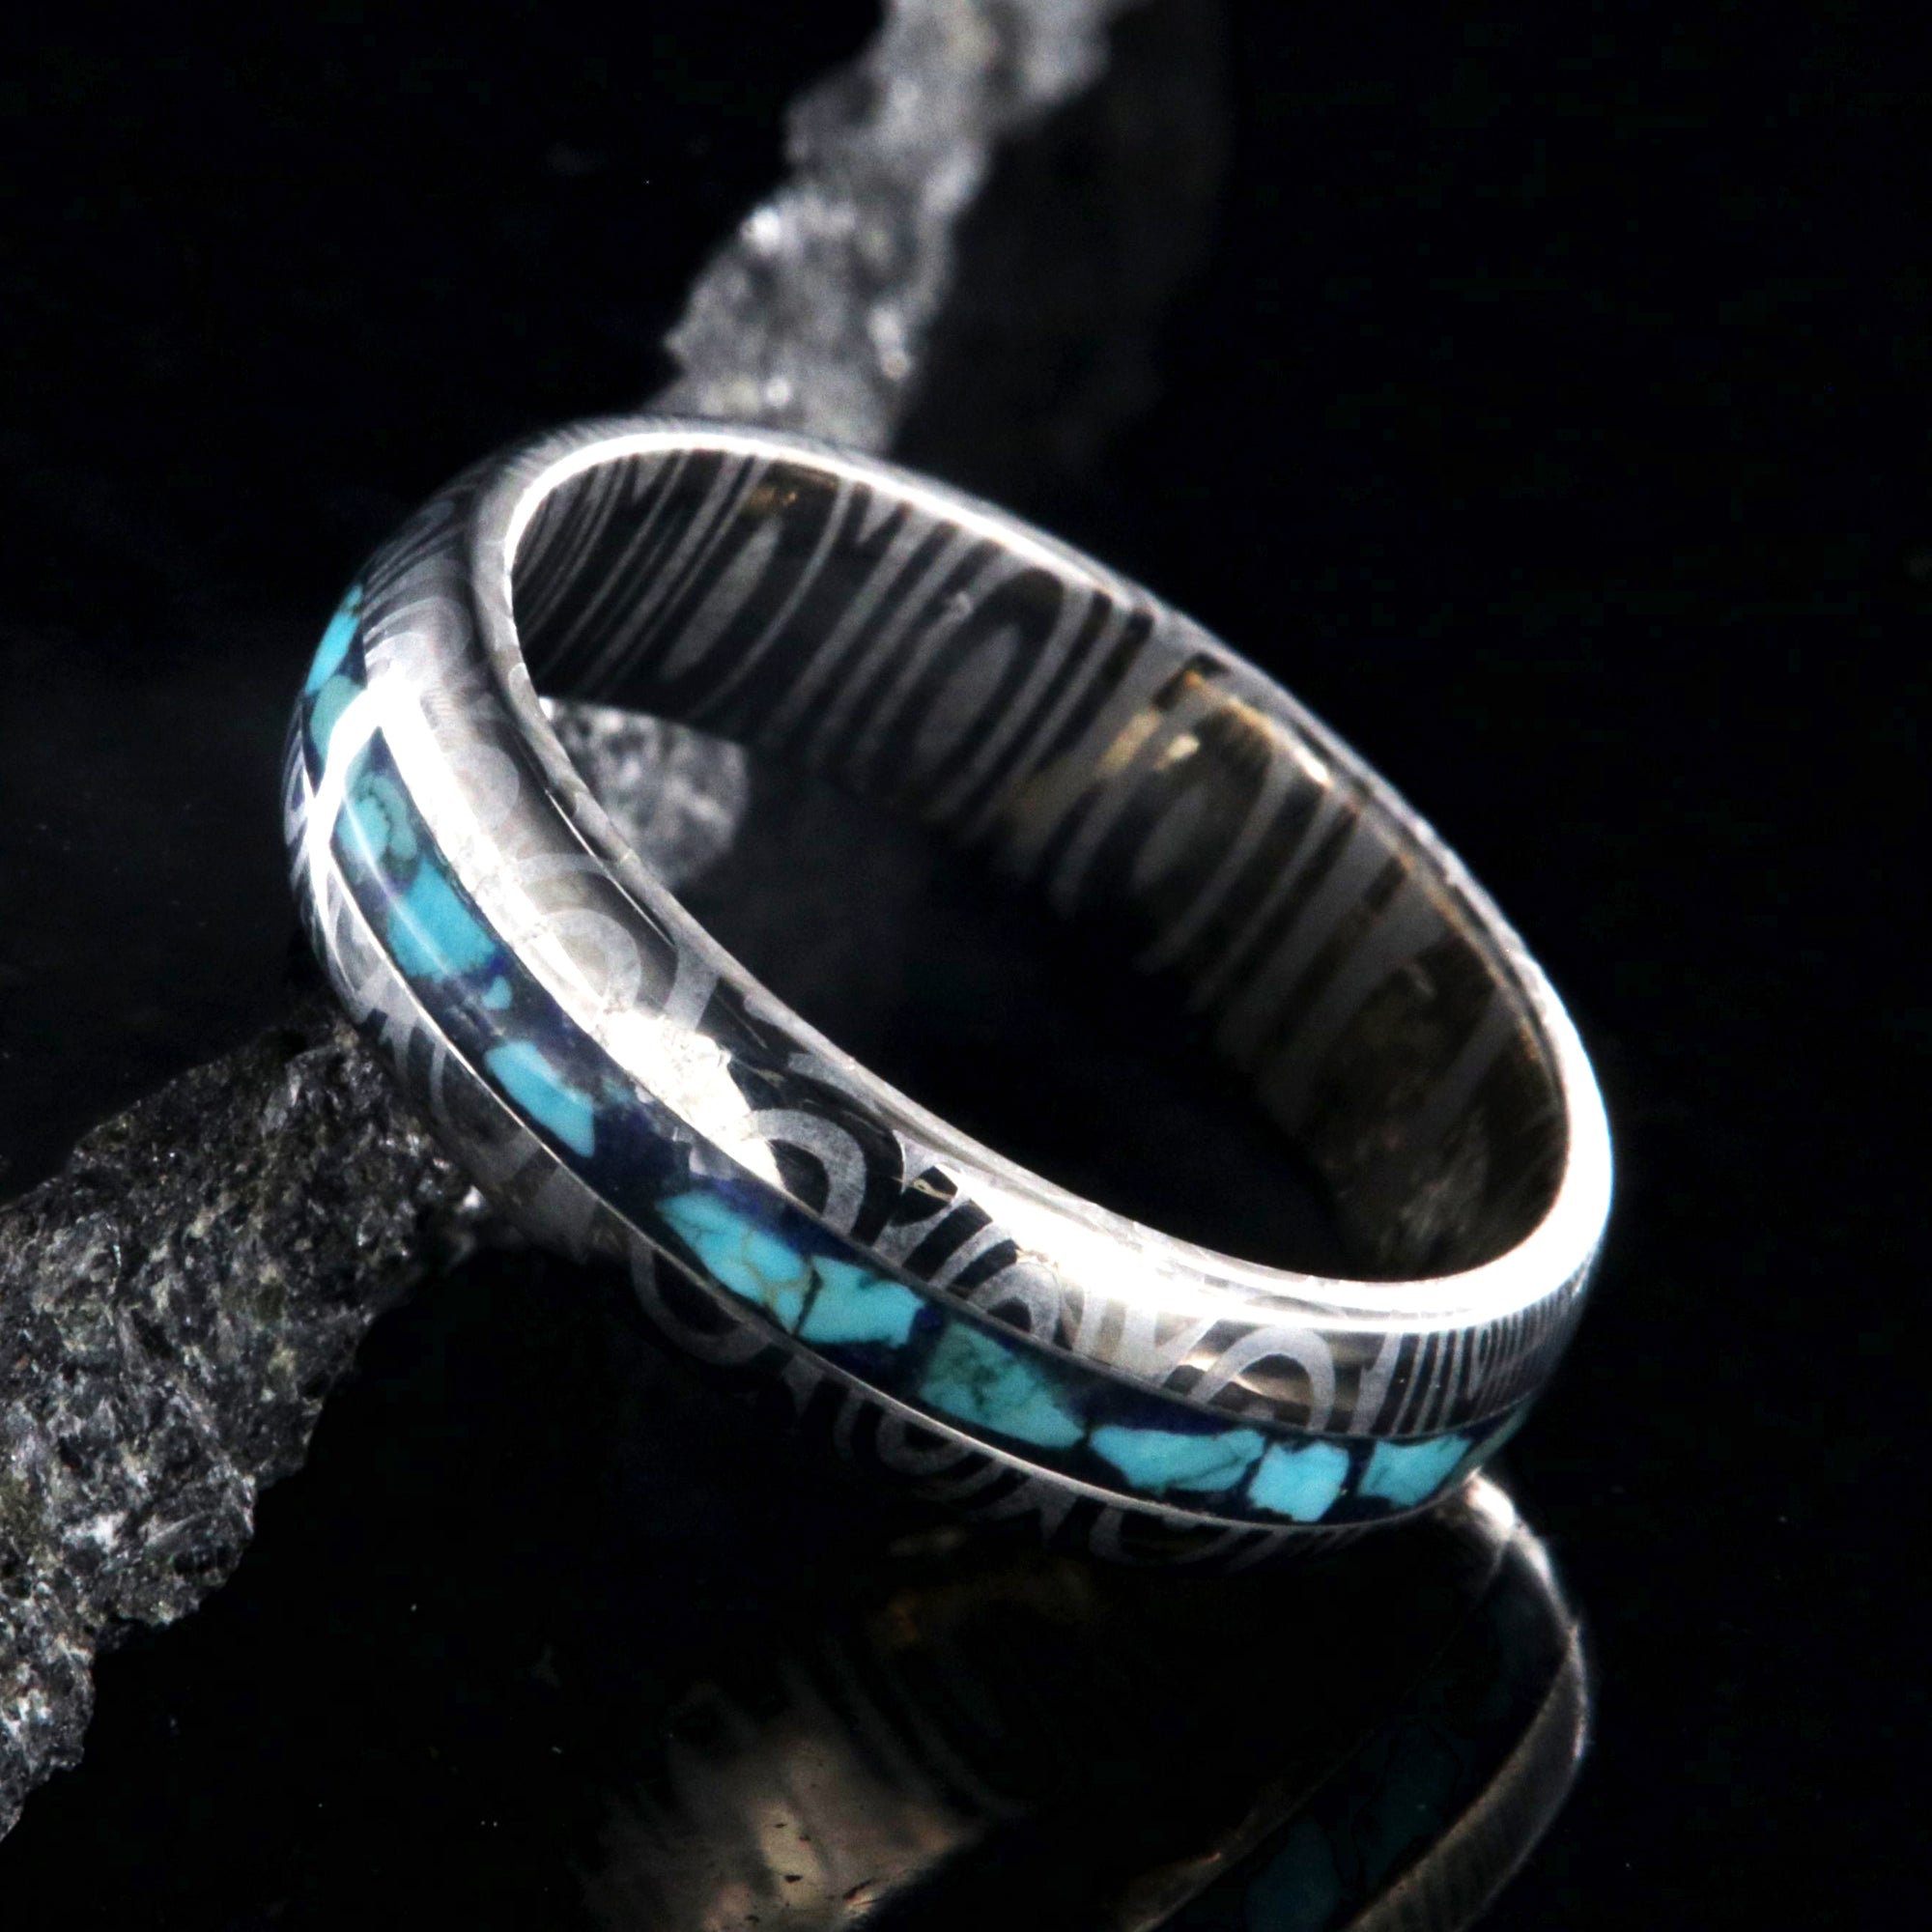 6mm wide Damascus steel ring with a 2mm wide centered turquoise and lapis inlay